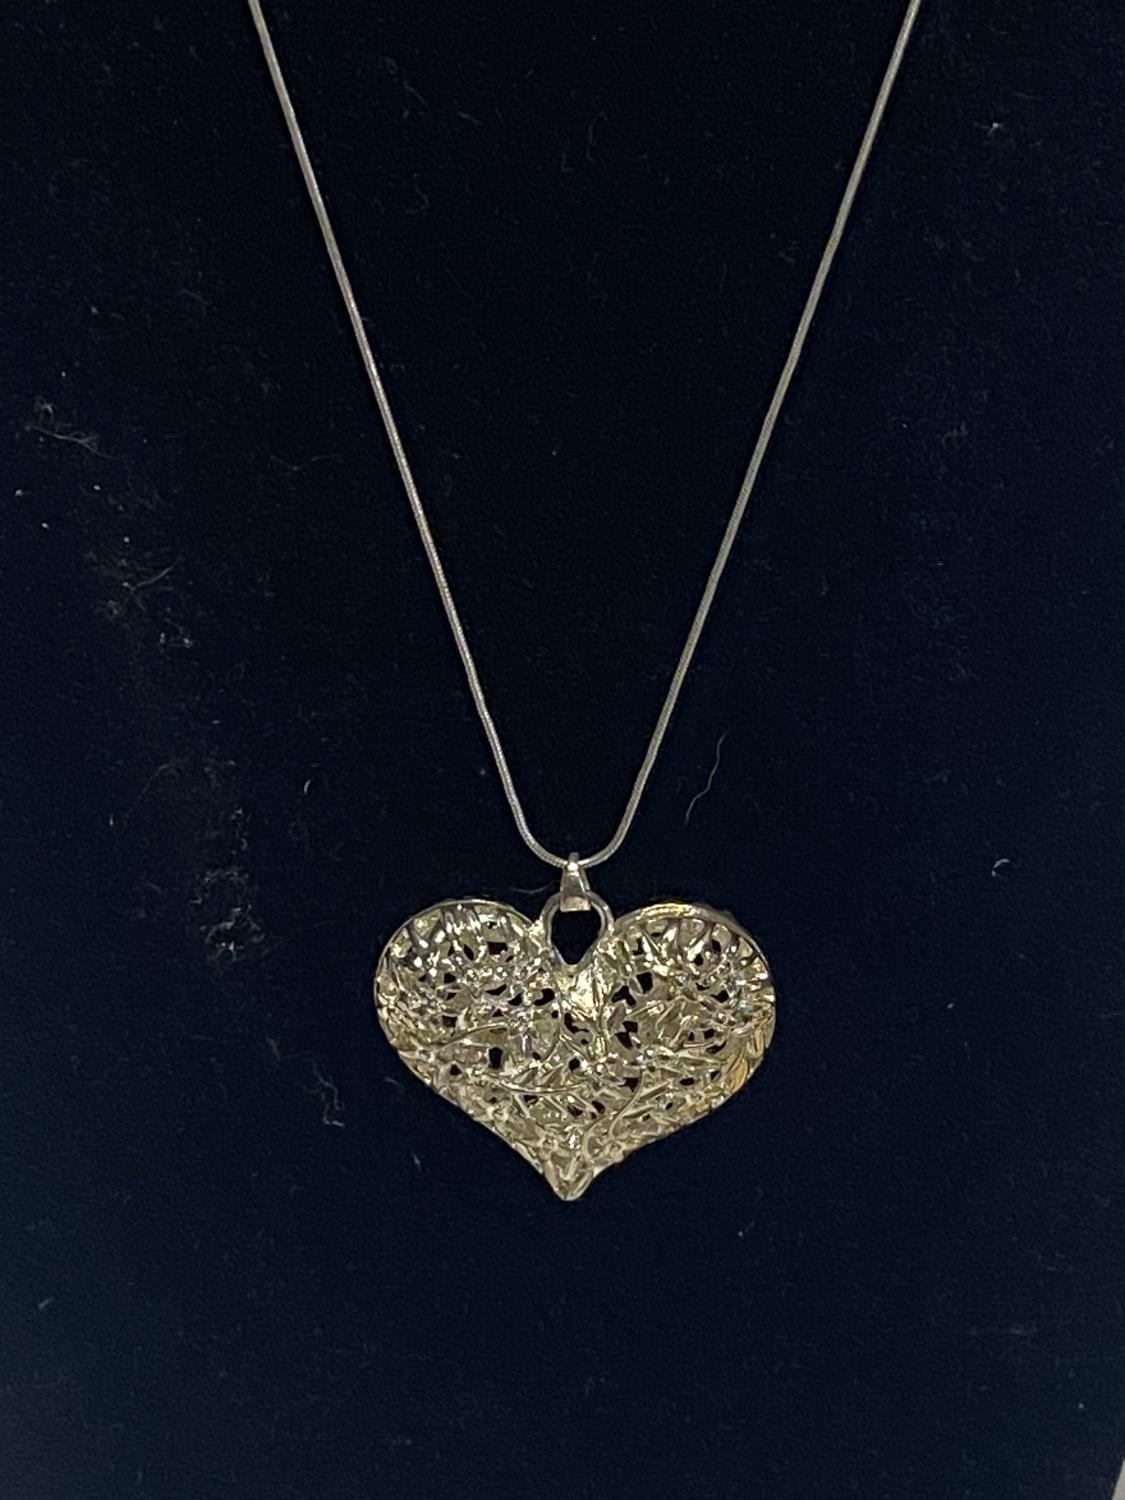 A 925 silver chain and heart pendant